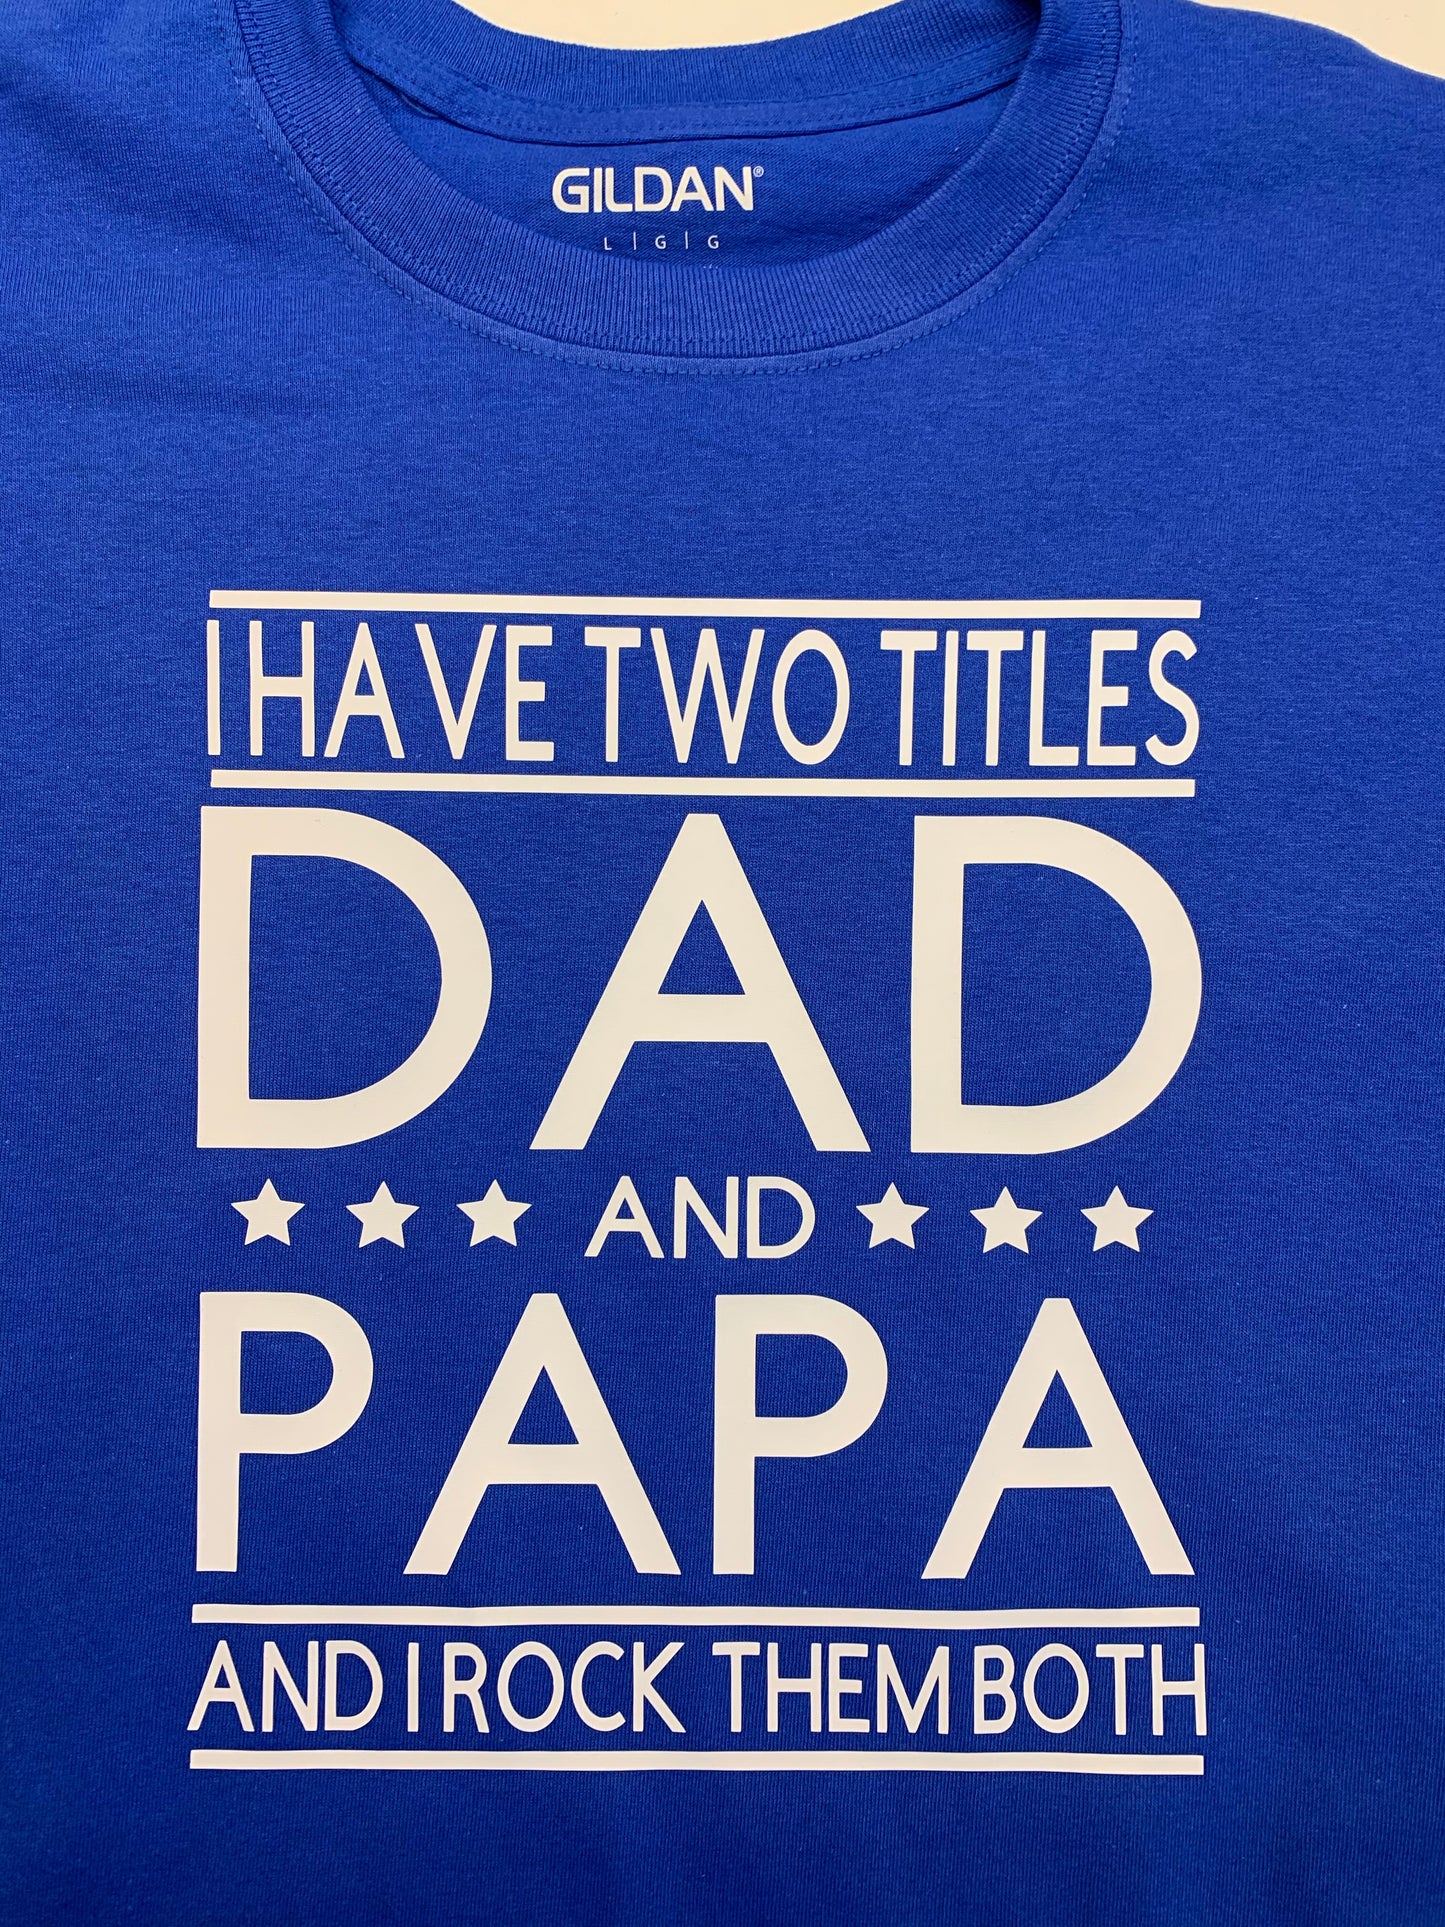 Dad and papa t shirt, great Father’s Day gift idea